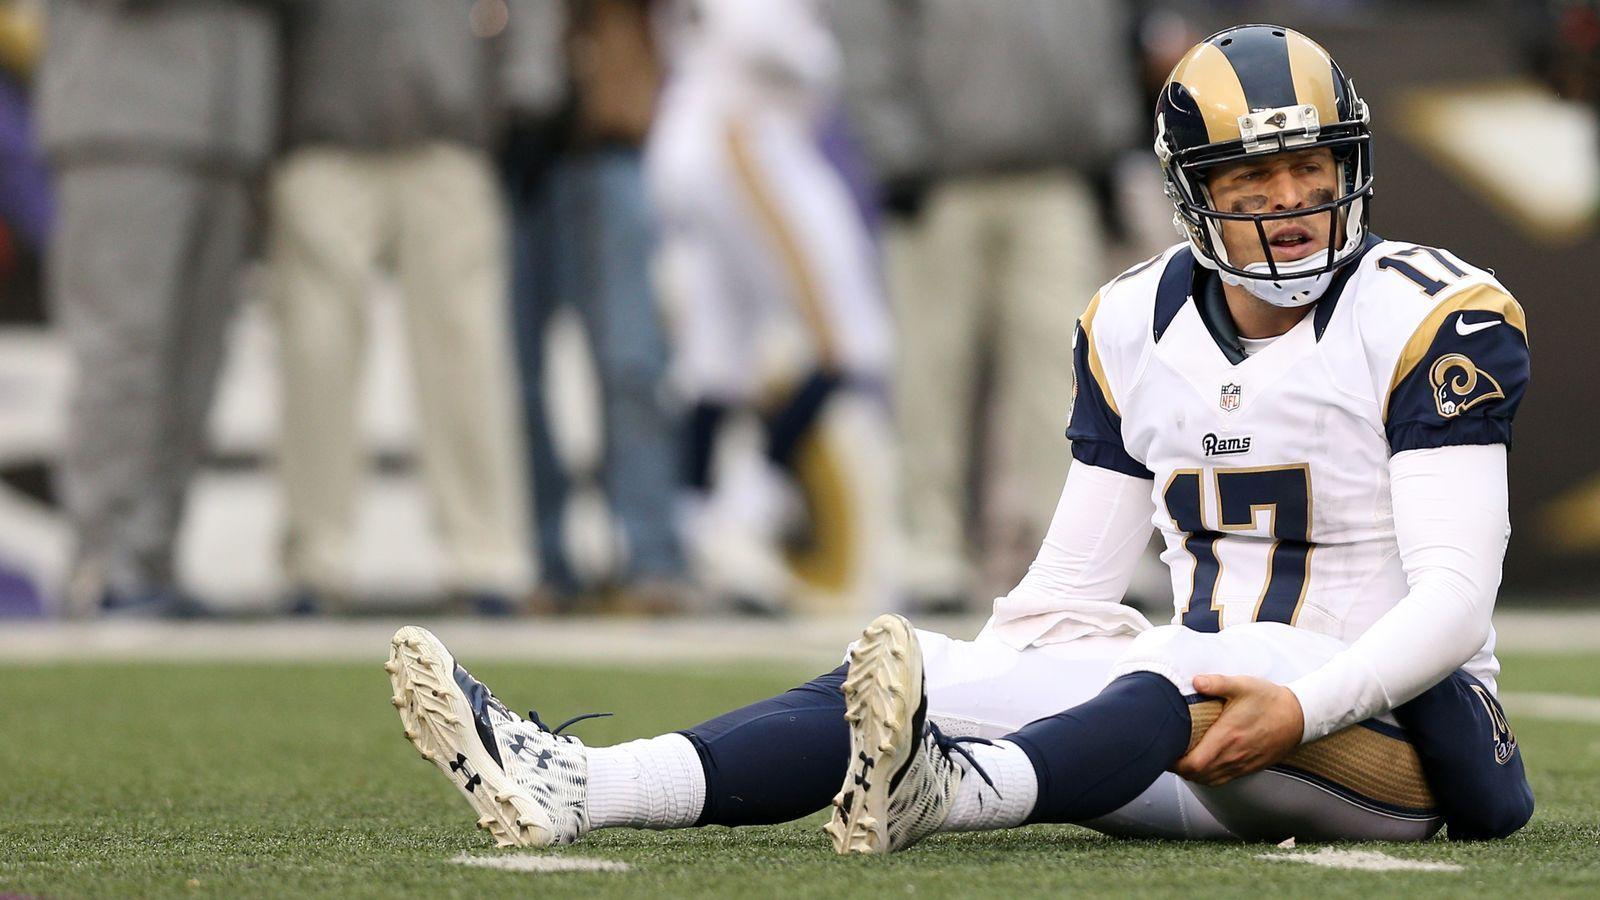 The Rams lost because nobody stopped Case Keenum from playing